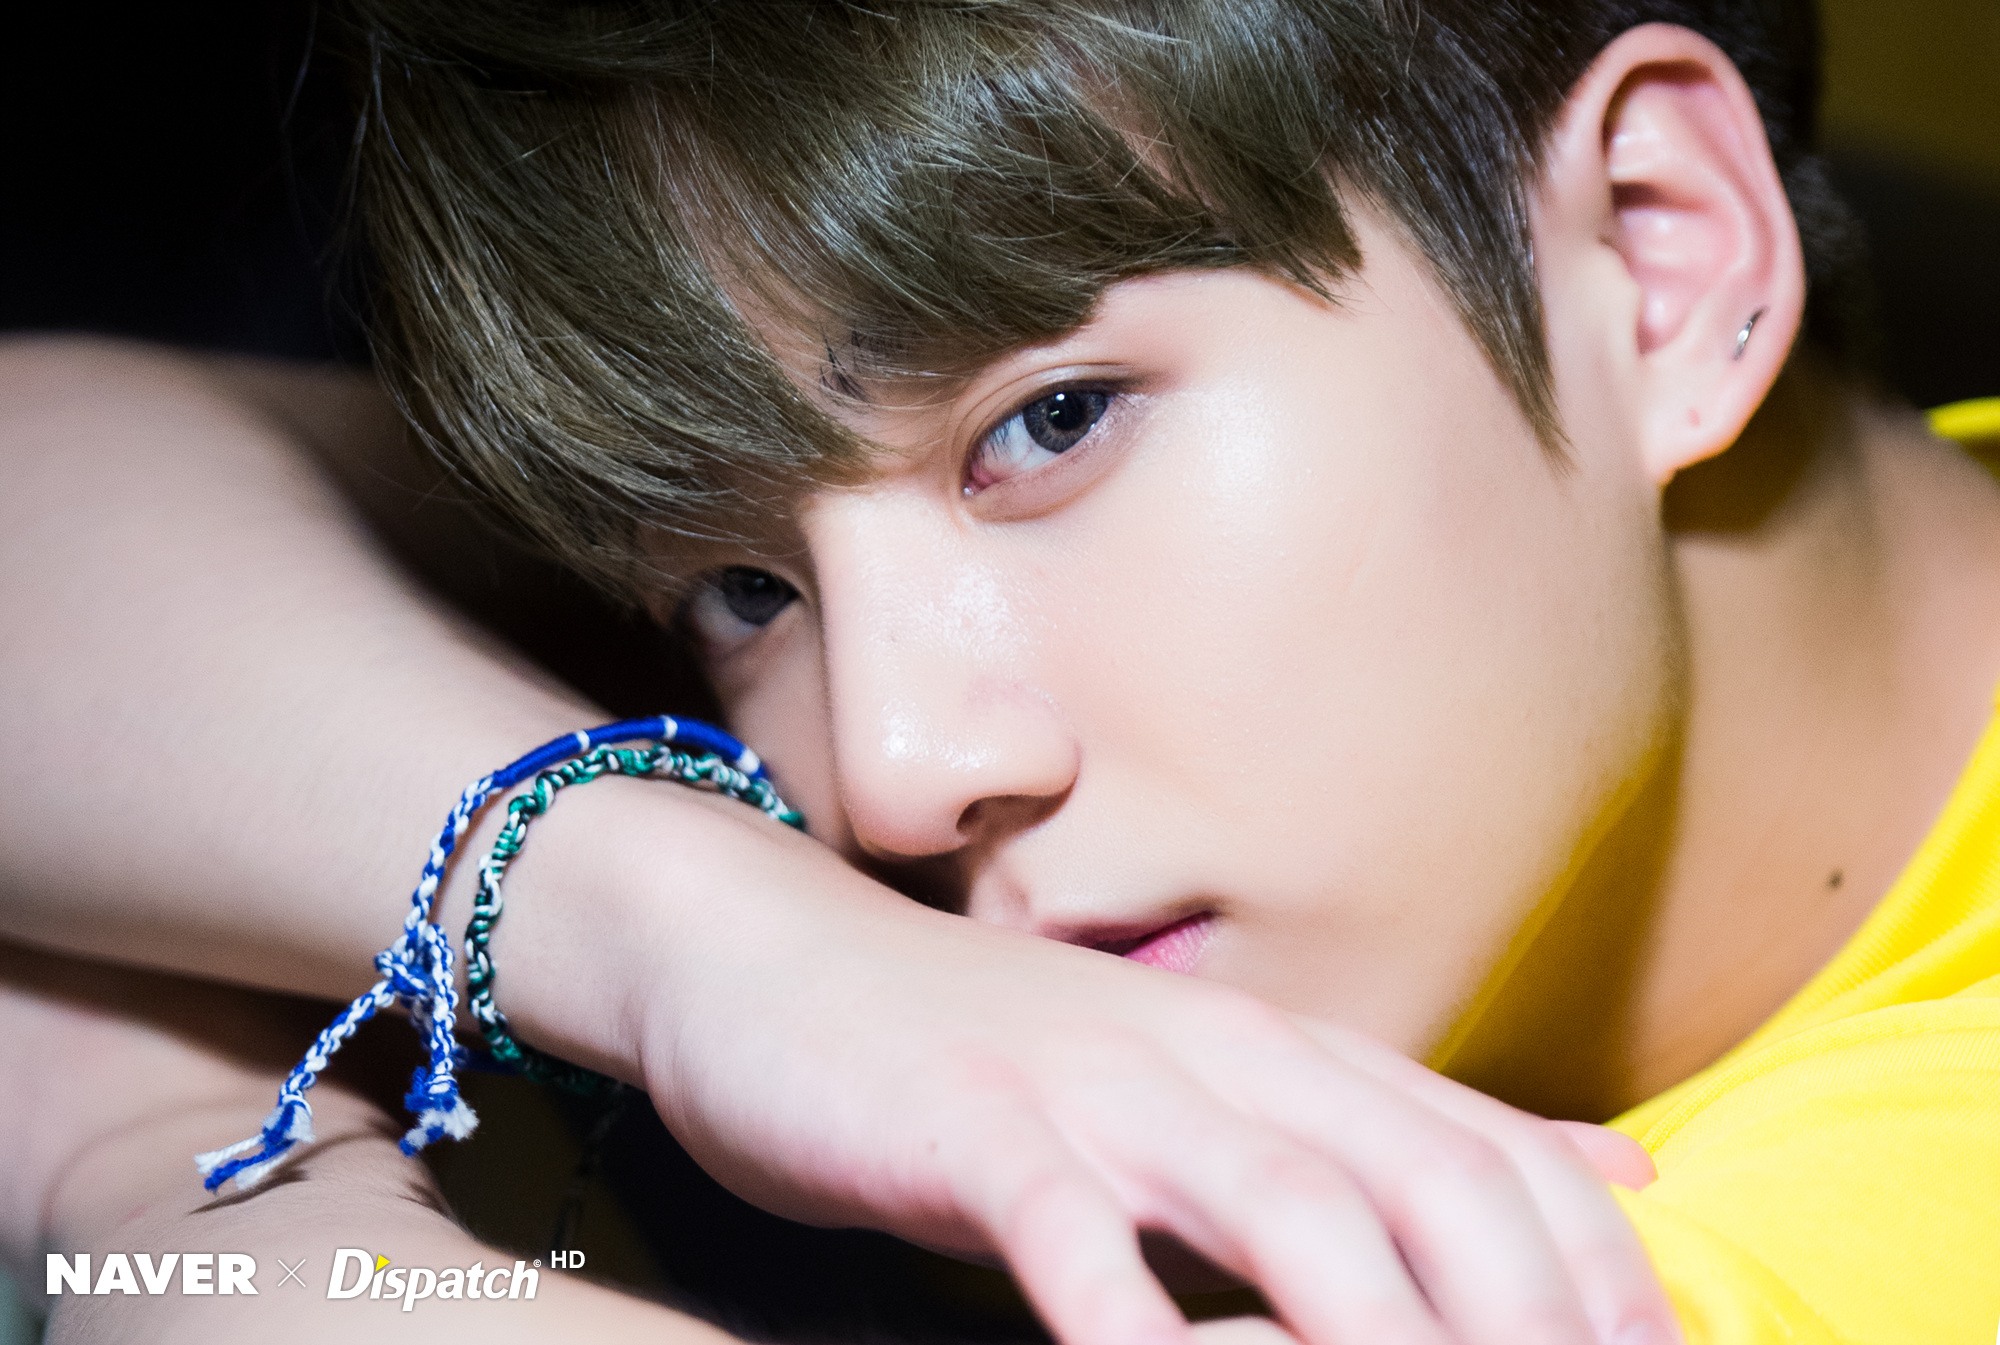 50 Ridiculously Hd Photos Of Bts From Their Love Yourself - Dispatch Bts Jungkook Hd , HD Wallpaper & Backgrounds